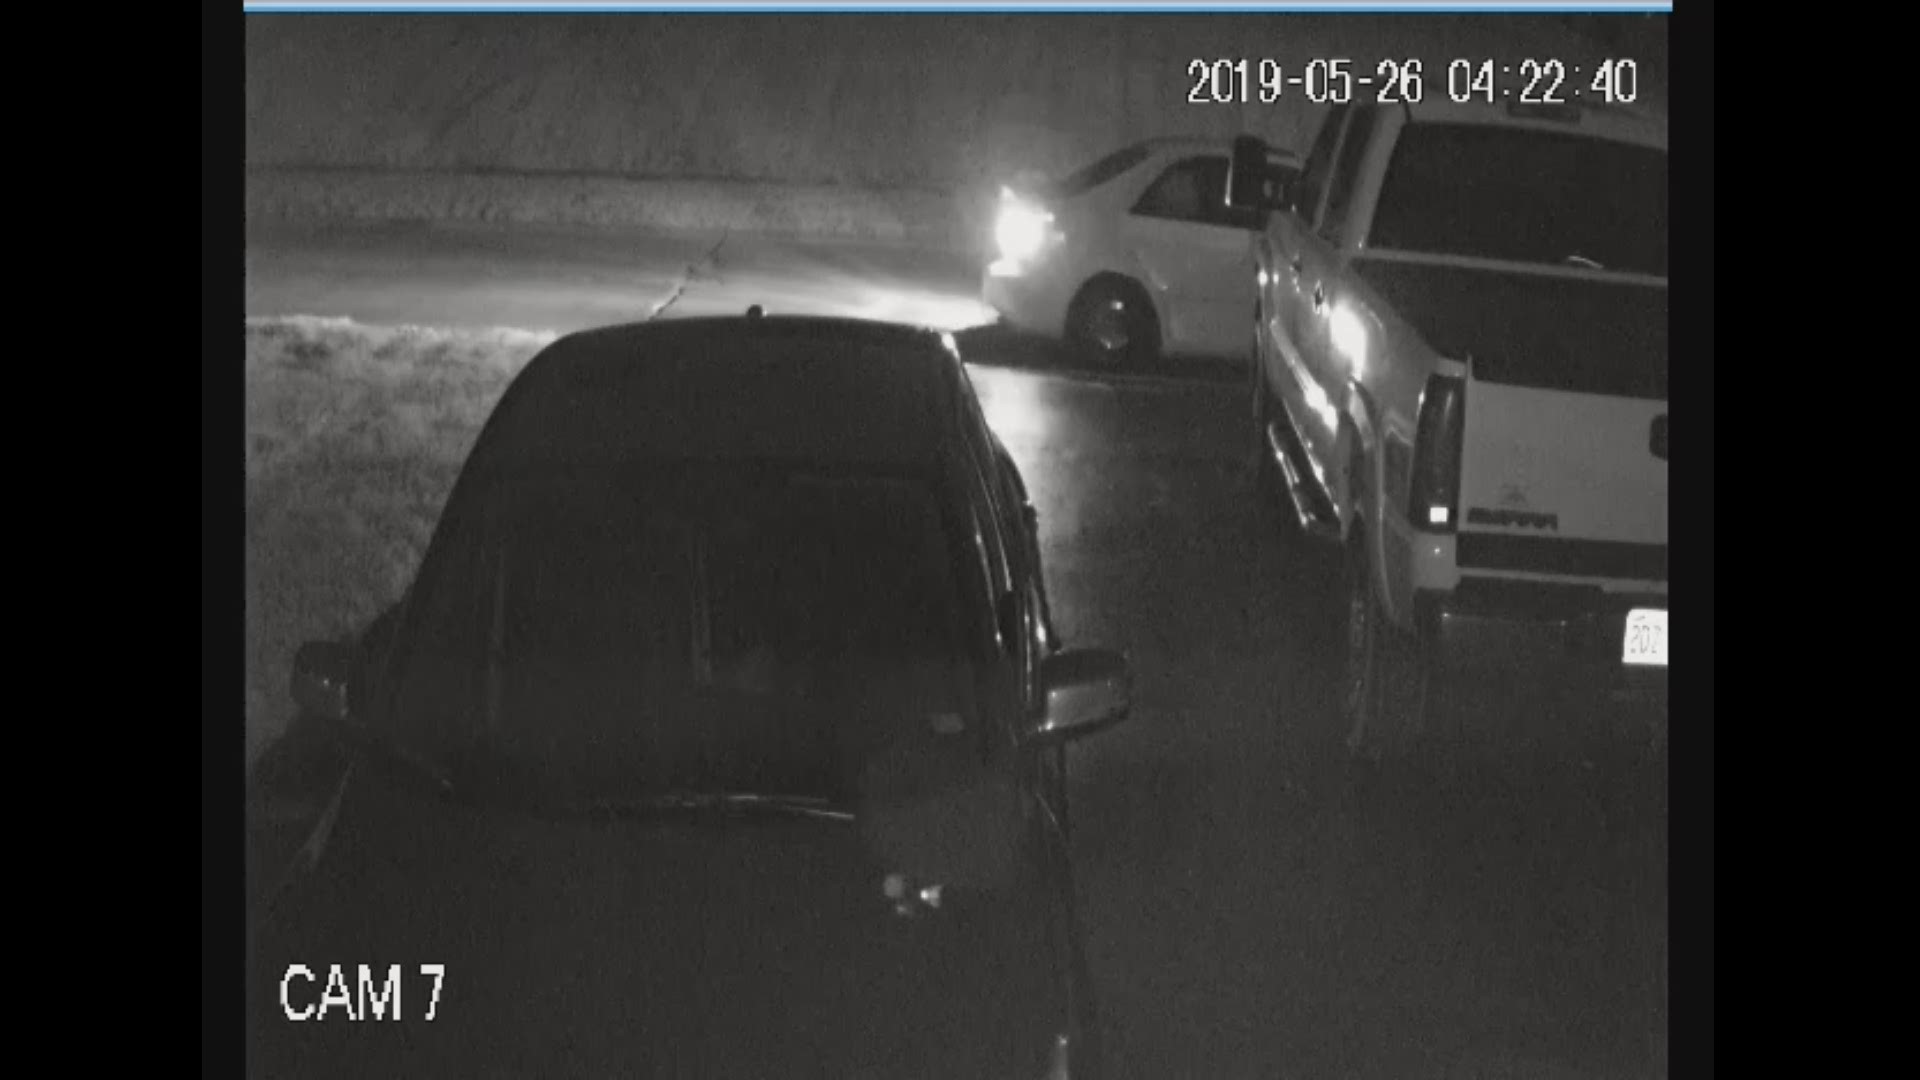 Police said the suspects arrived in a stolen 2003 Mazda 6 and stole a 2016 Honda Accord. Police said both of the stolen cars were unlocked with keys left inside. Video